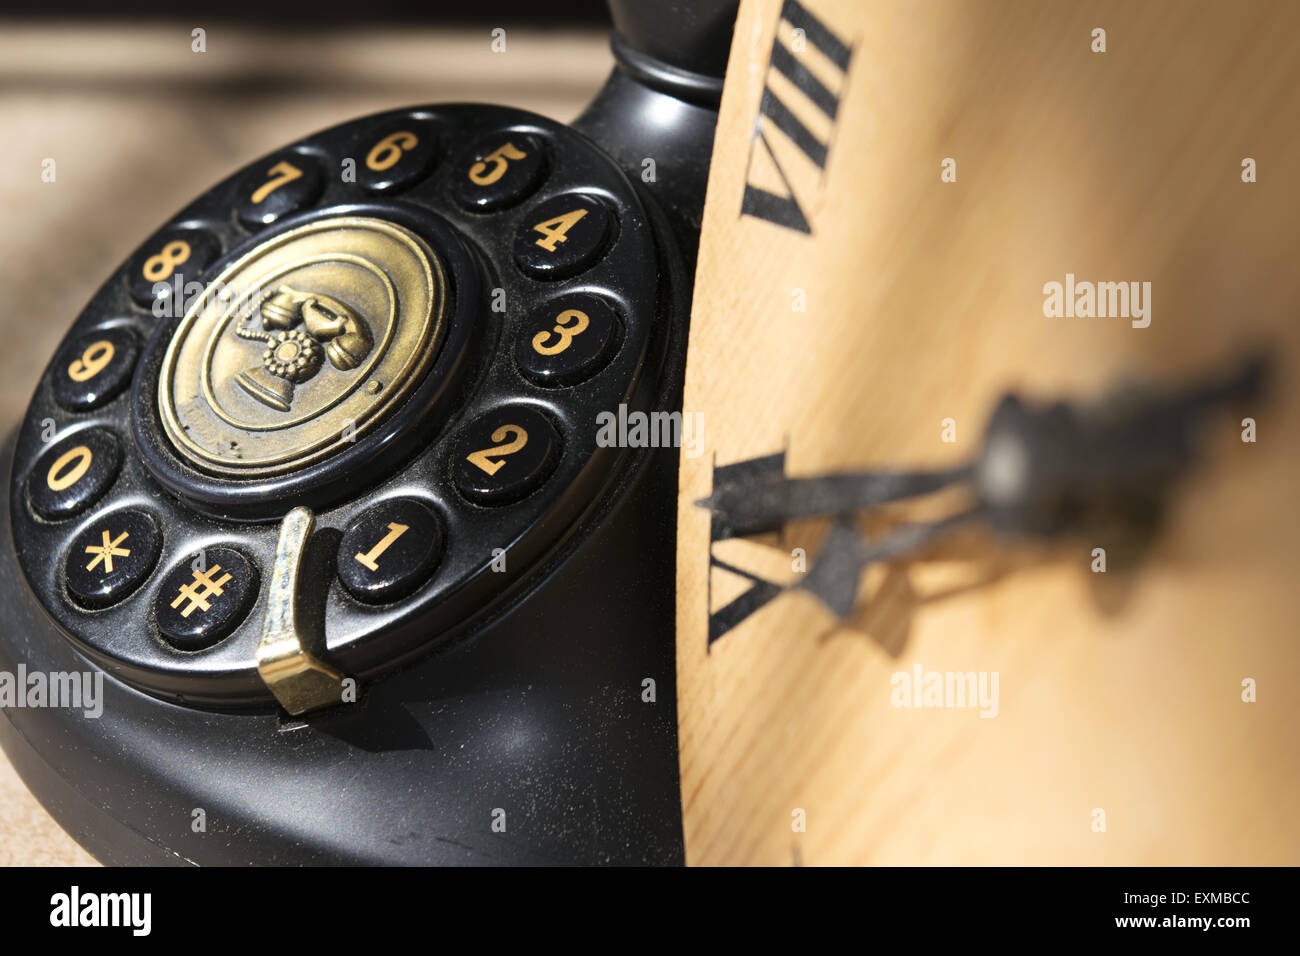 clock with roman enumeration  and black antique phone with manual keys Stock Photo